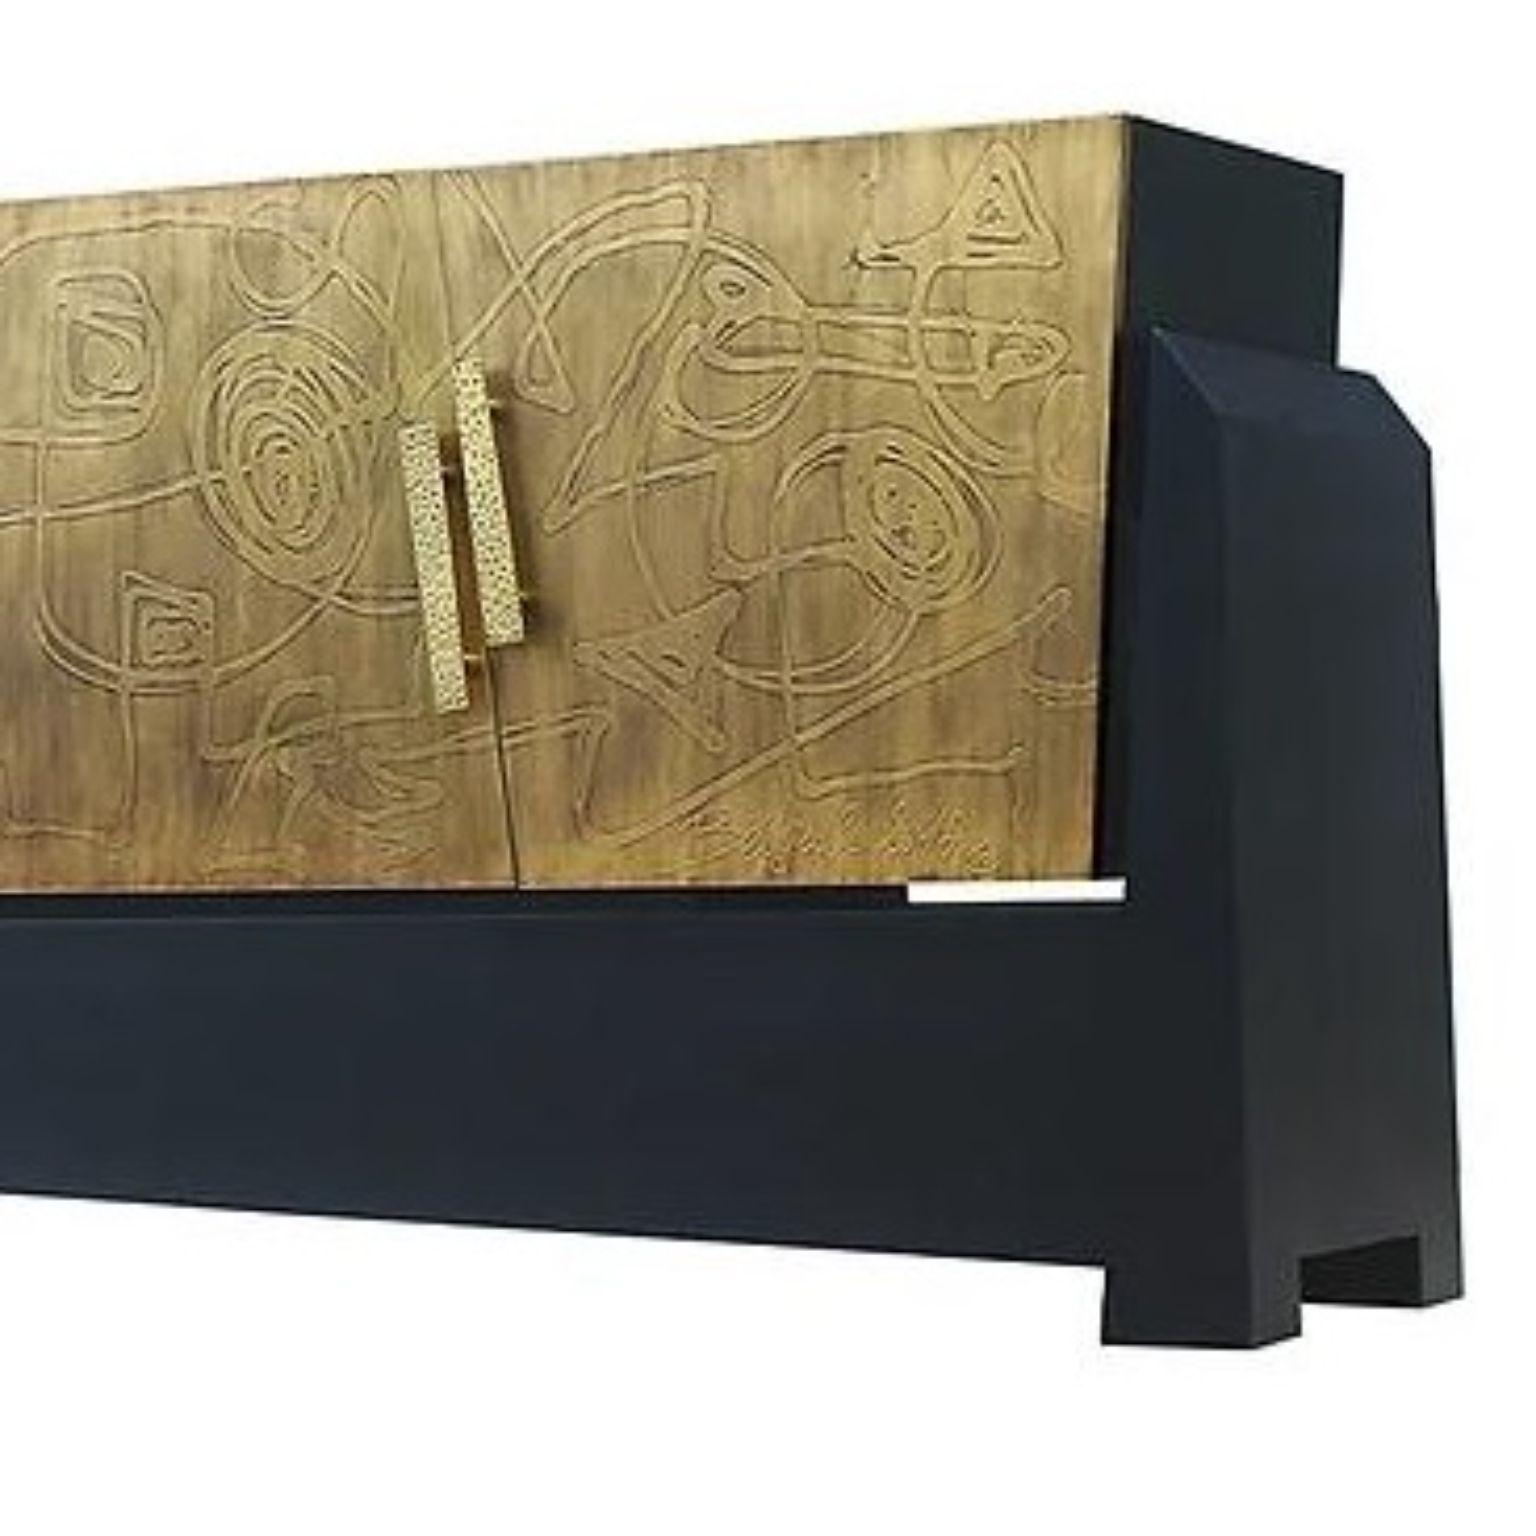 Front Plated in Acid-Etched Brass Trapezium 4D Cabinet by Brutalist Be
One Of A Kind
Dimensions: D 49 x W 207 x H 80 cm.
Materials: Brass and black lacquered wood.

This exclusive sideboard is hand-made of brass and wood, carefully selected and then